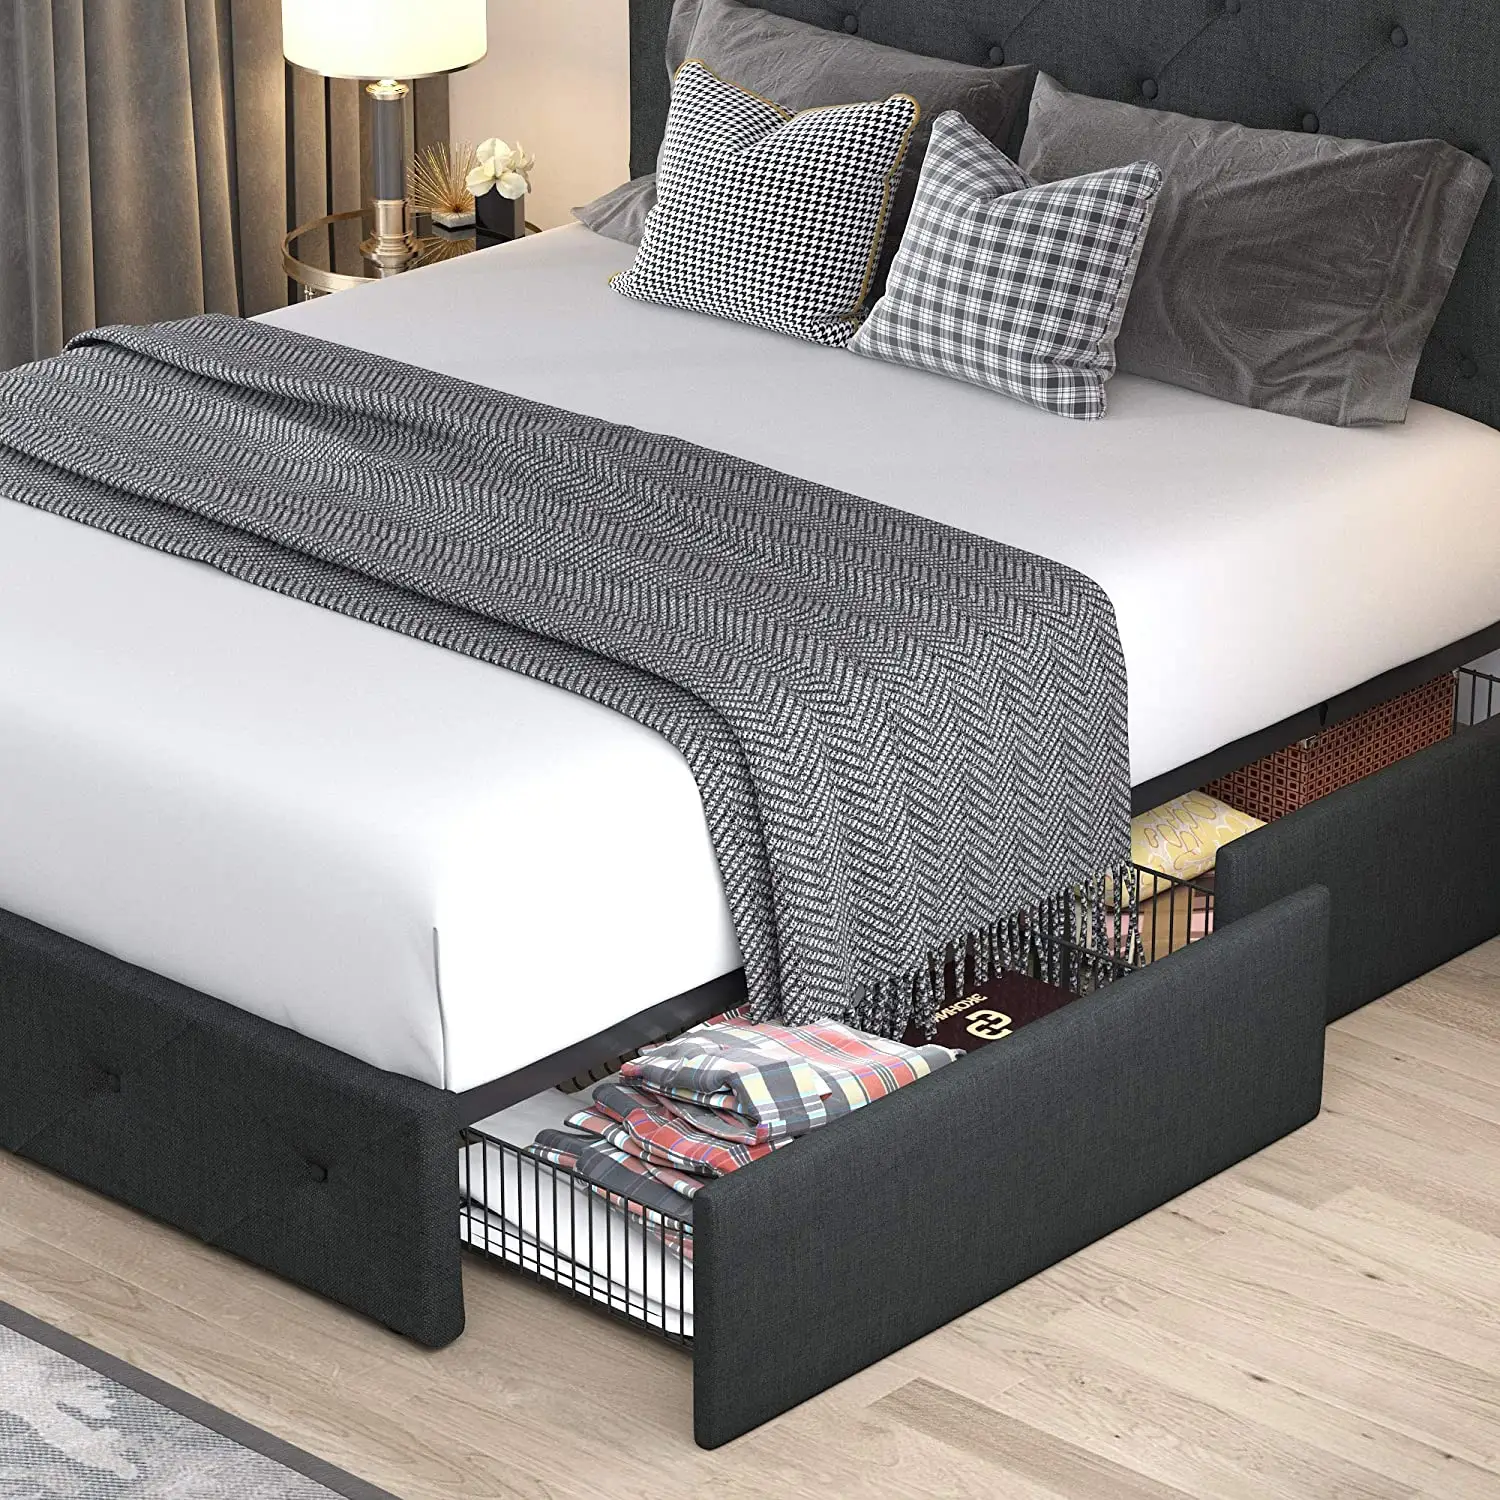 Modern Tufted Soft Button Upholstered Cheap Double Single Queen King Size Fabric Storage Bed Frame With Storage Drawers